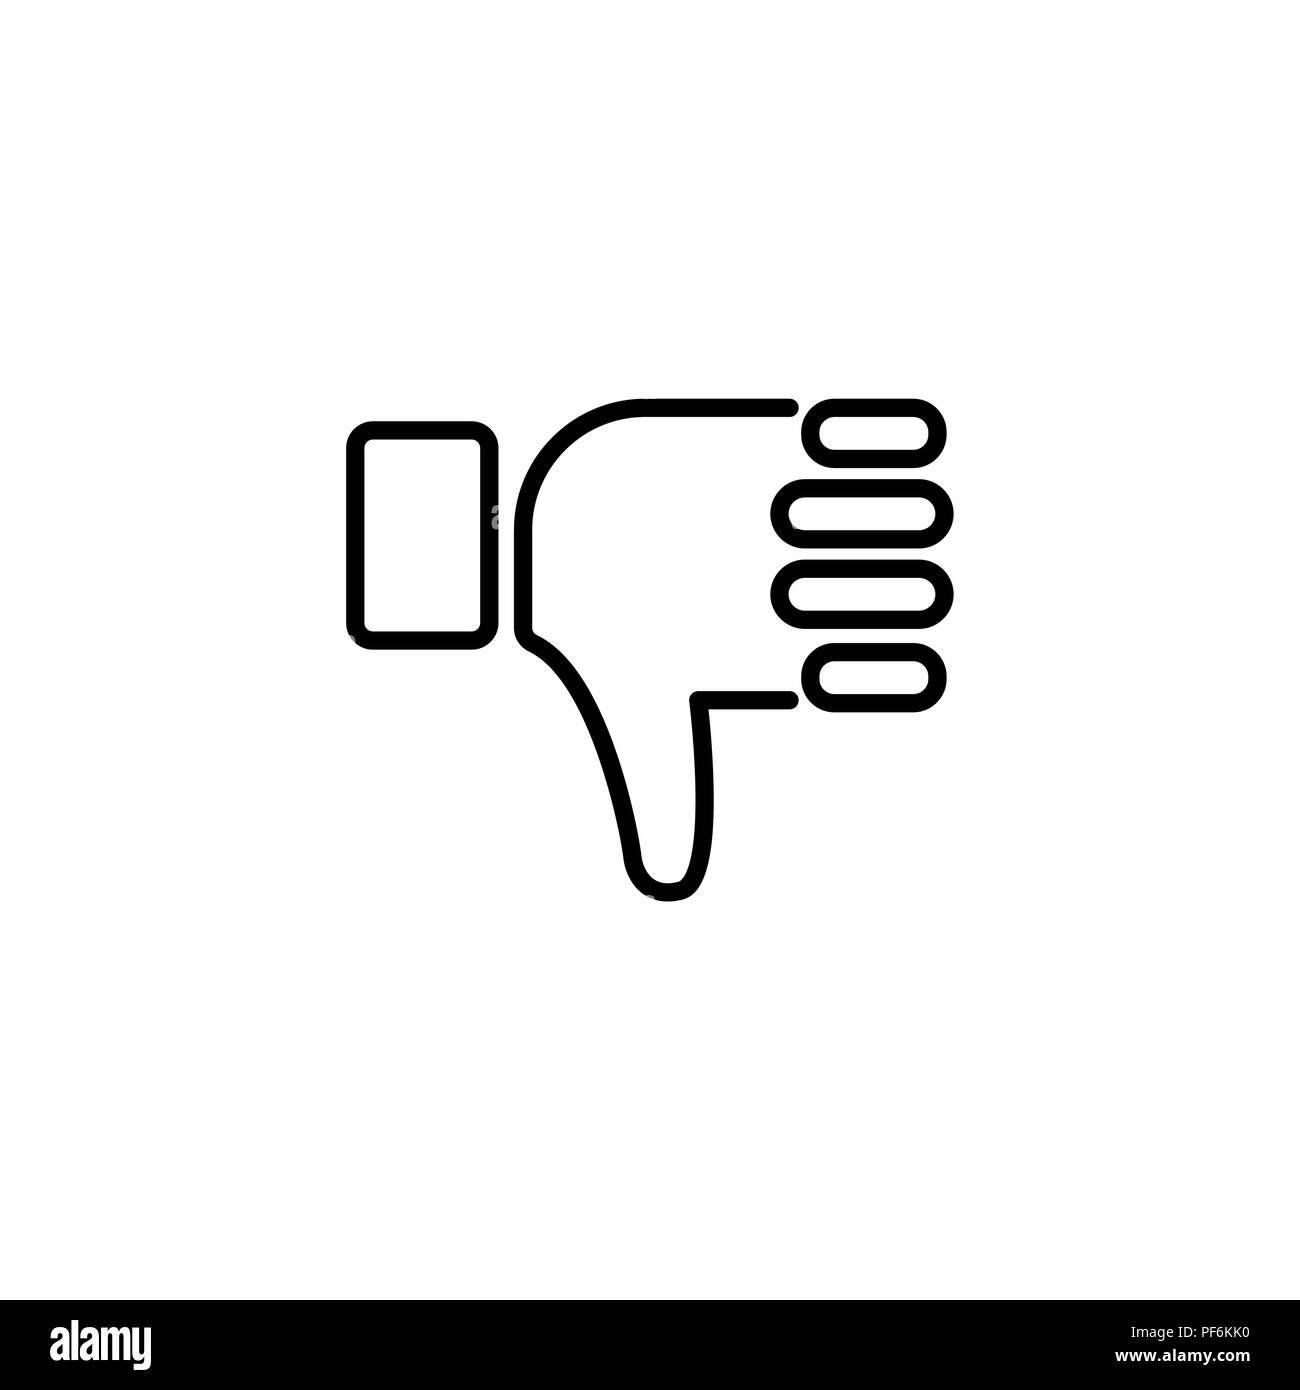 Web line icon. Thumbs Down, dislike black on white background Stock Vector